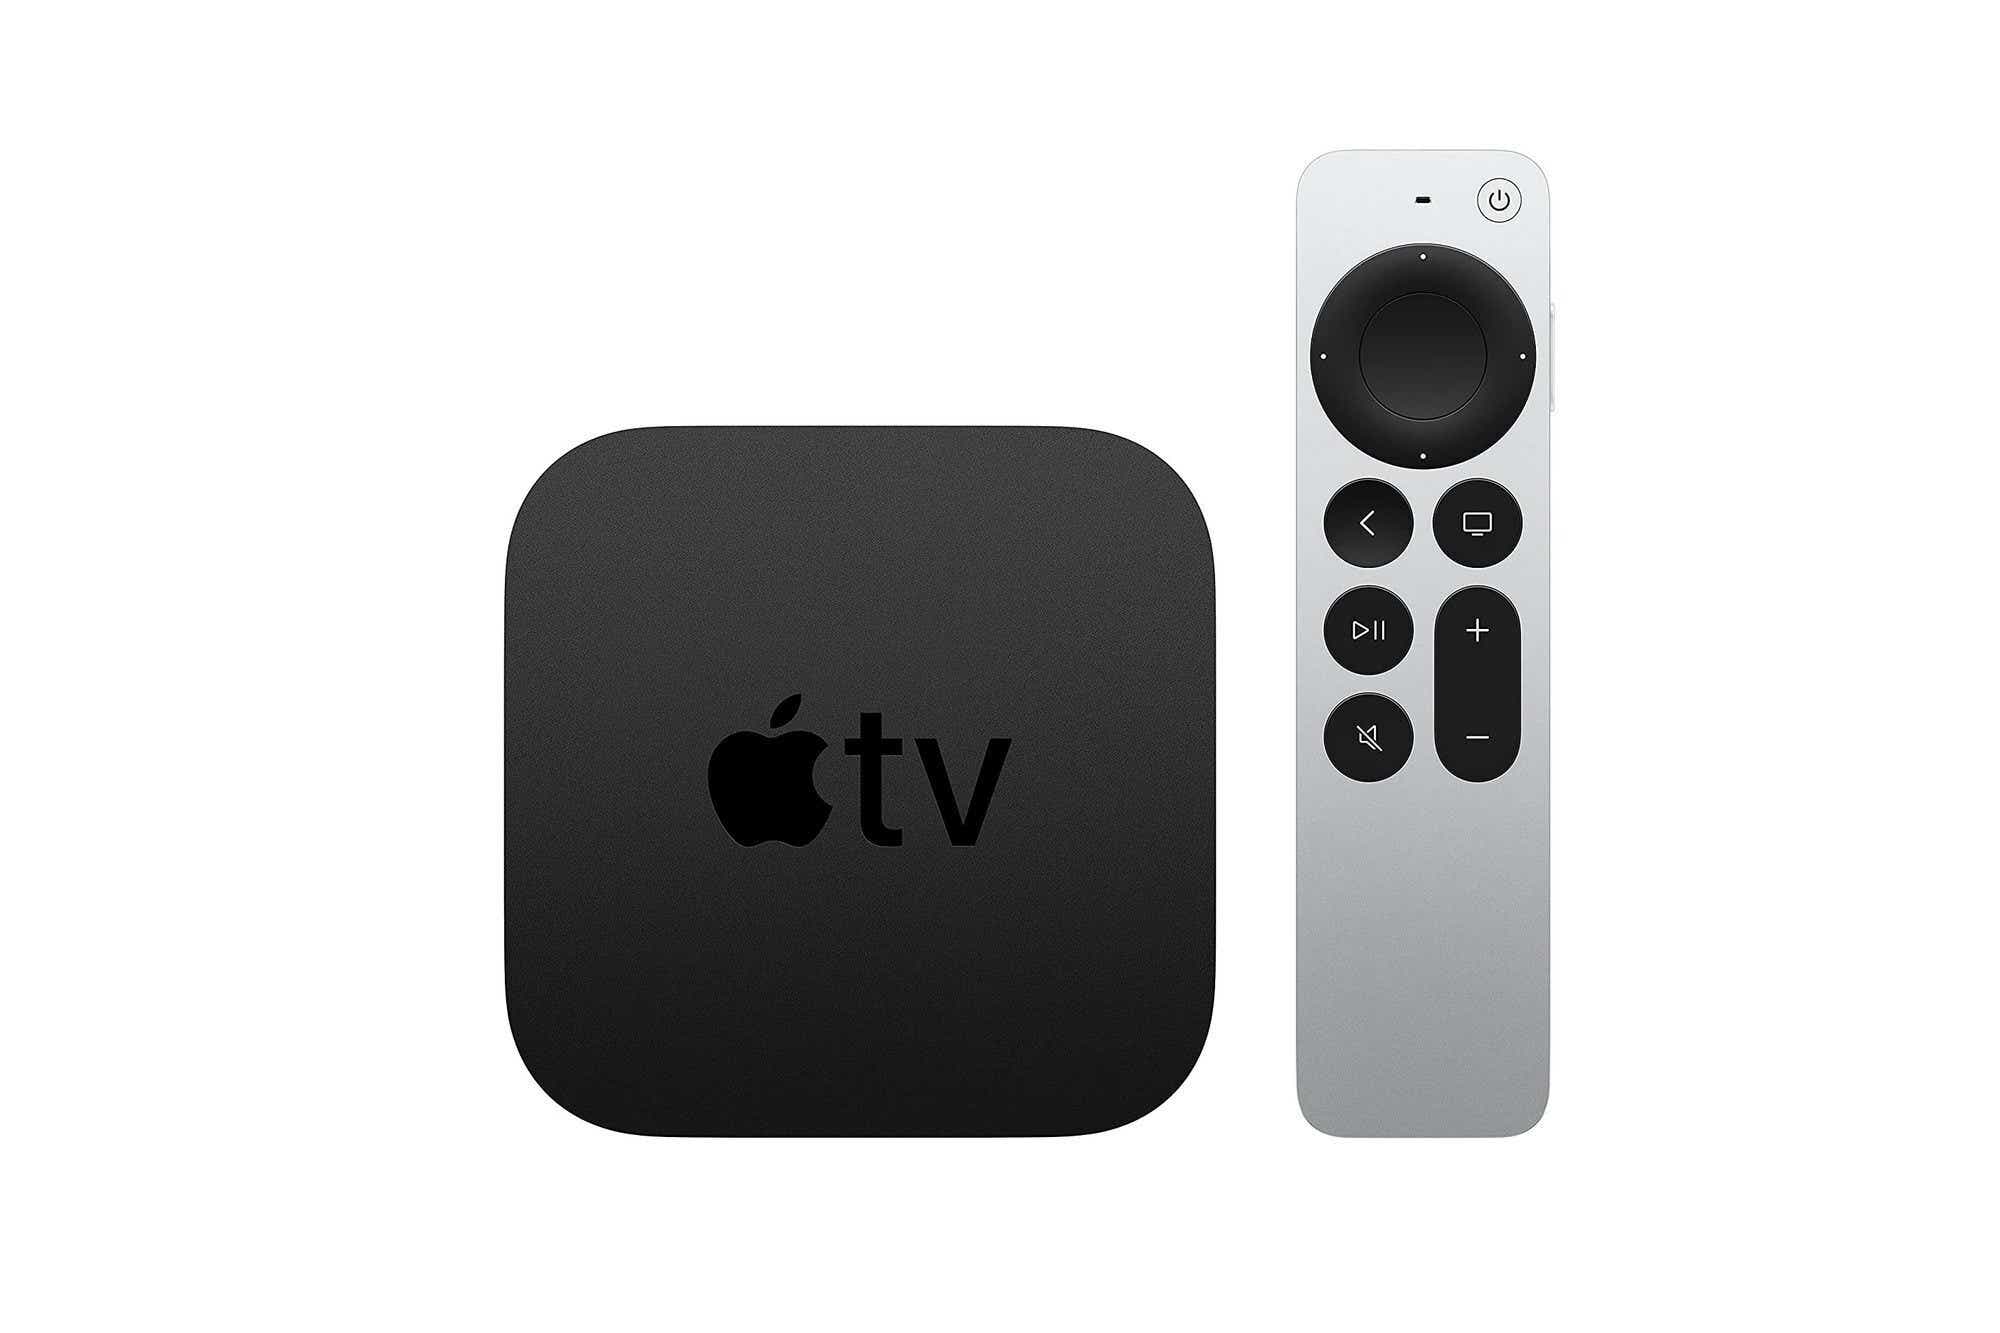 New Siri remote reference in iOS 16 beta could point to fall Apple TV update